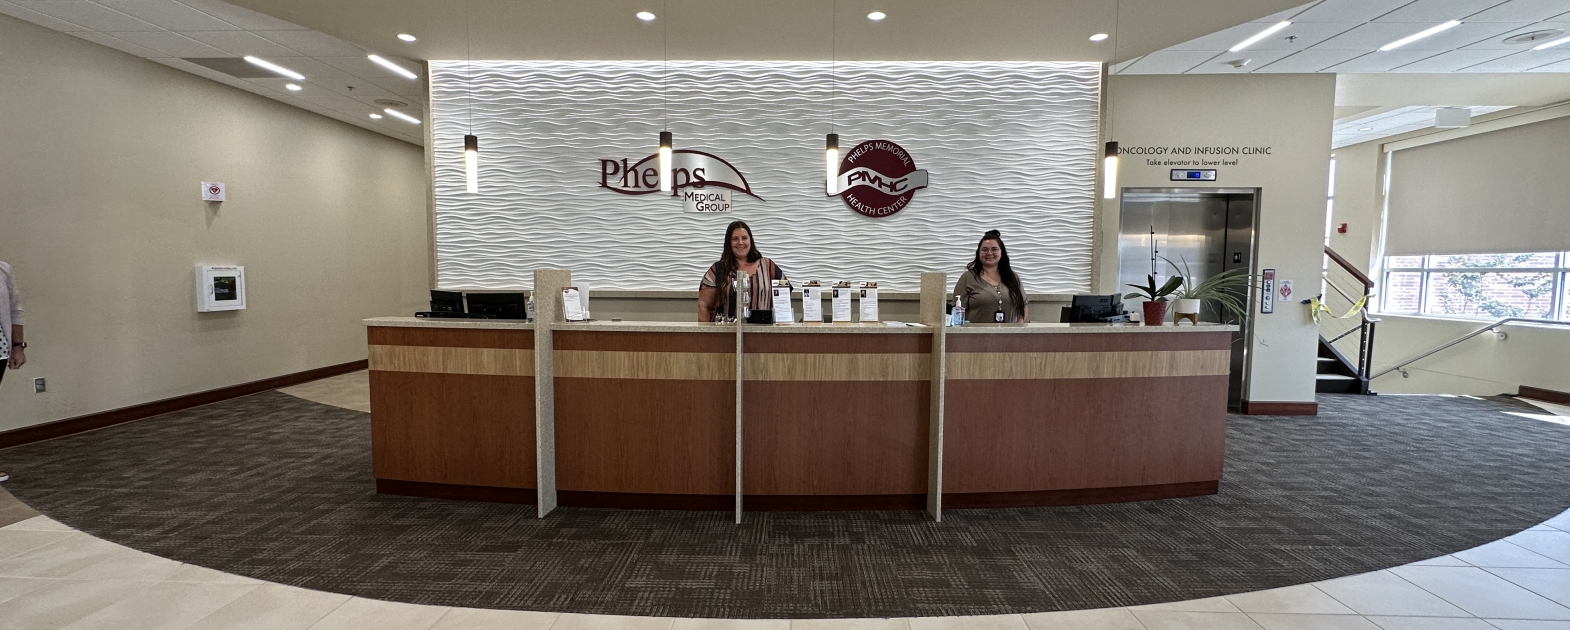 Reception desk Phelps Medical Group clinic